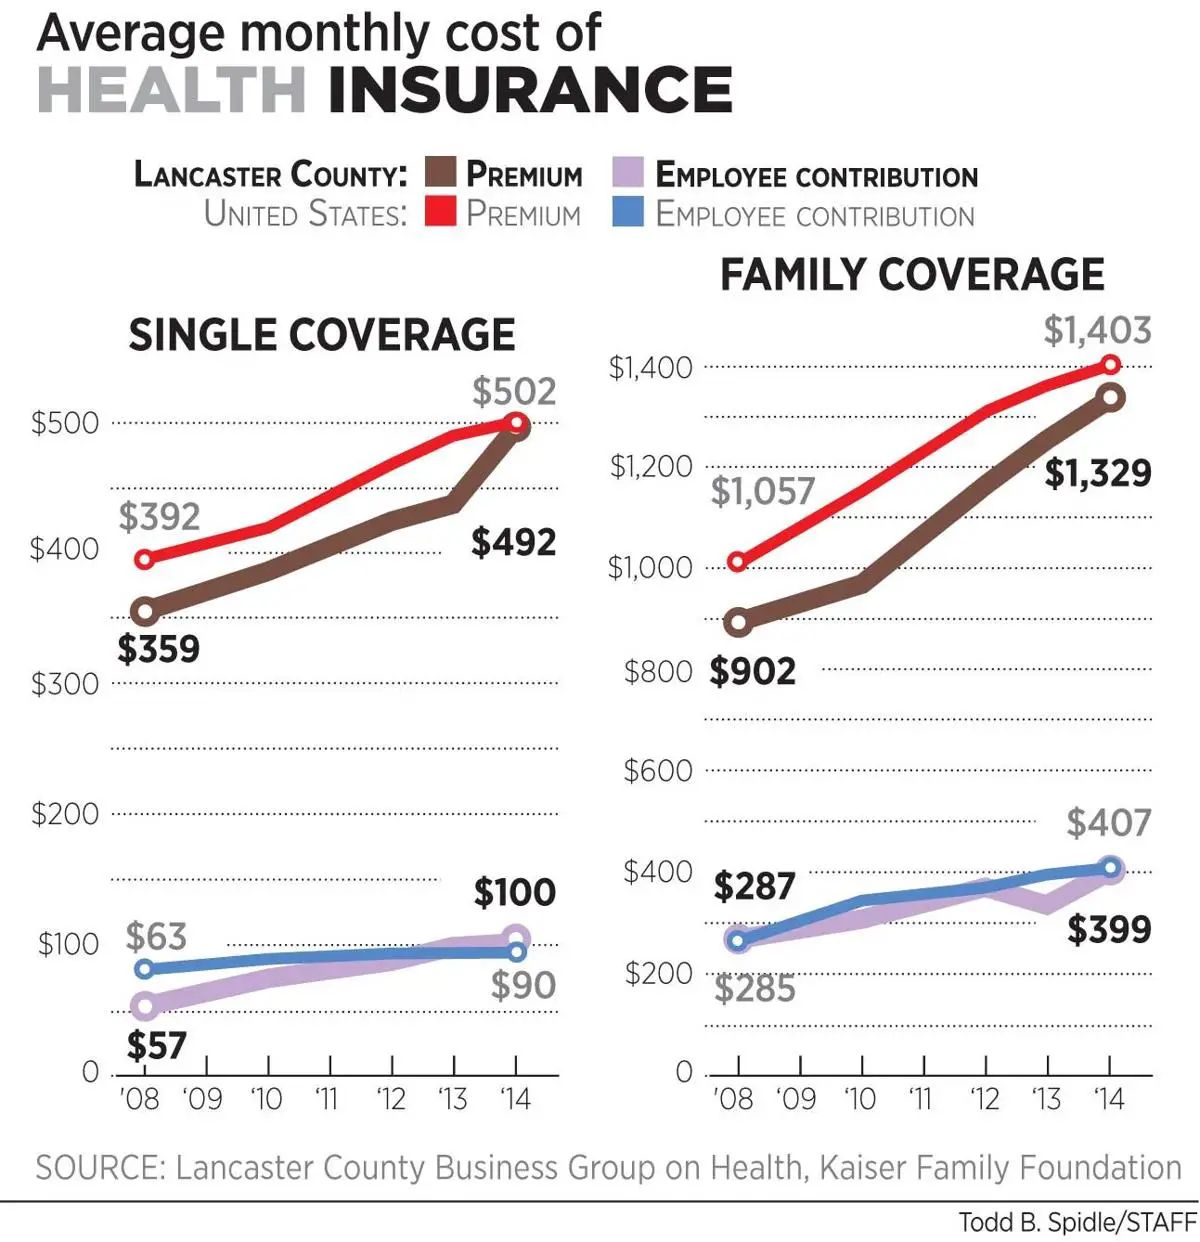 A bargain no longer: Lancaster County health insurance costs approach ...